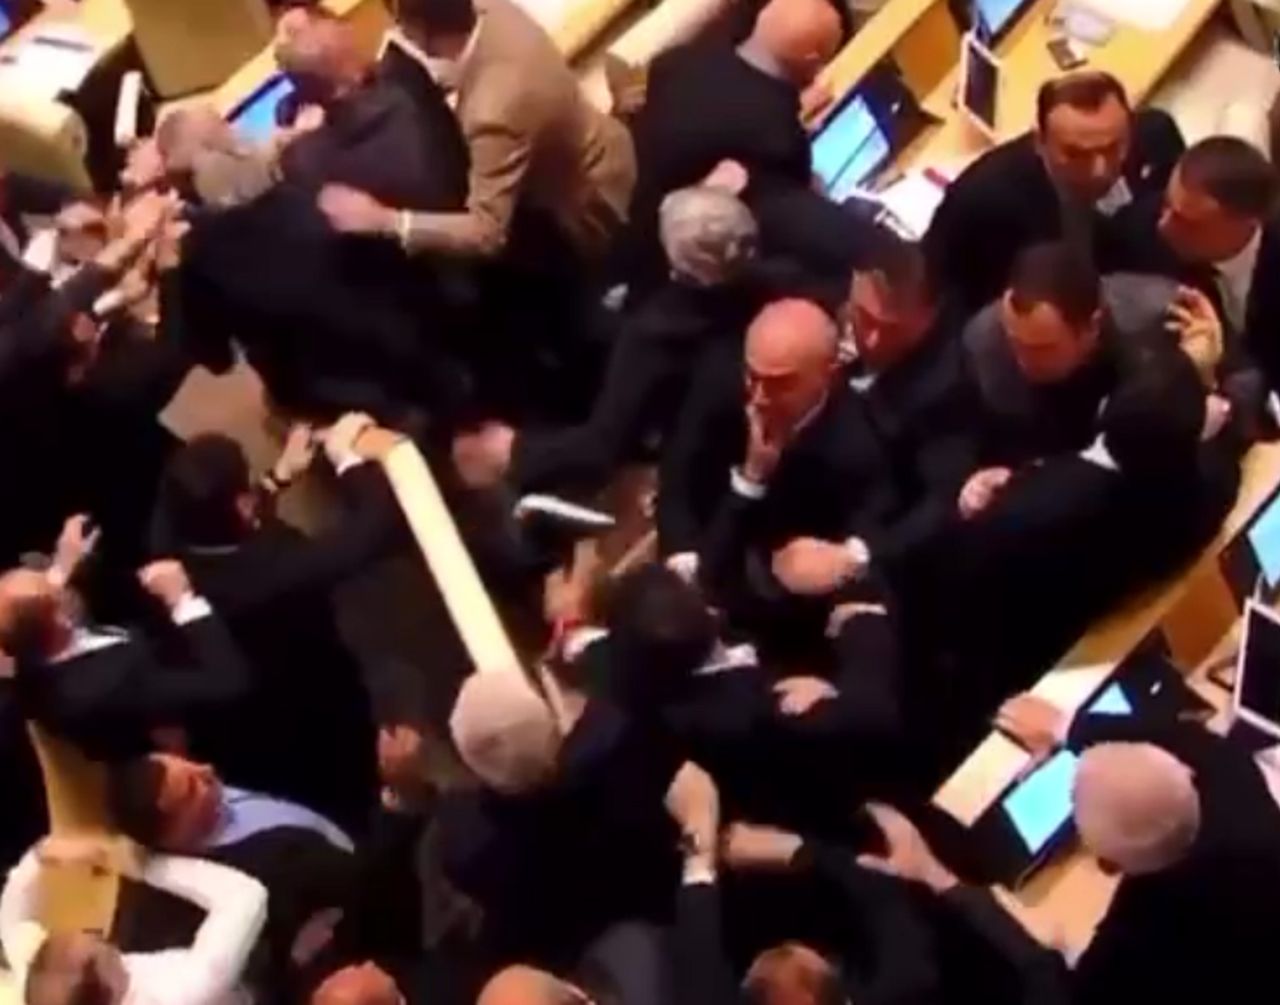 MP brawl. There was a fistfight in the Georgian parliament.